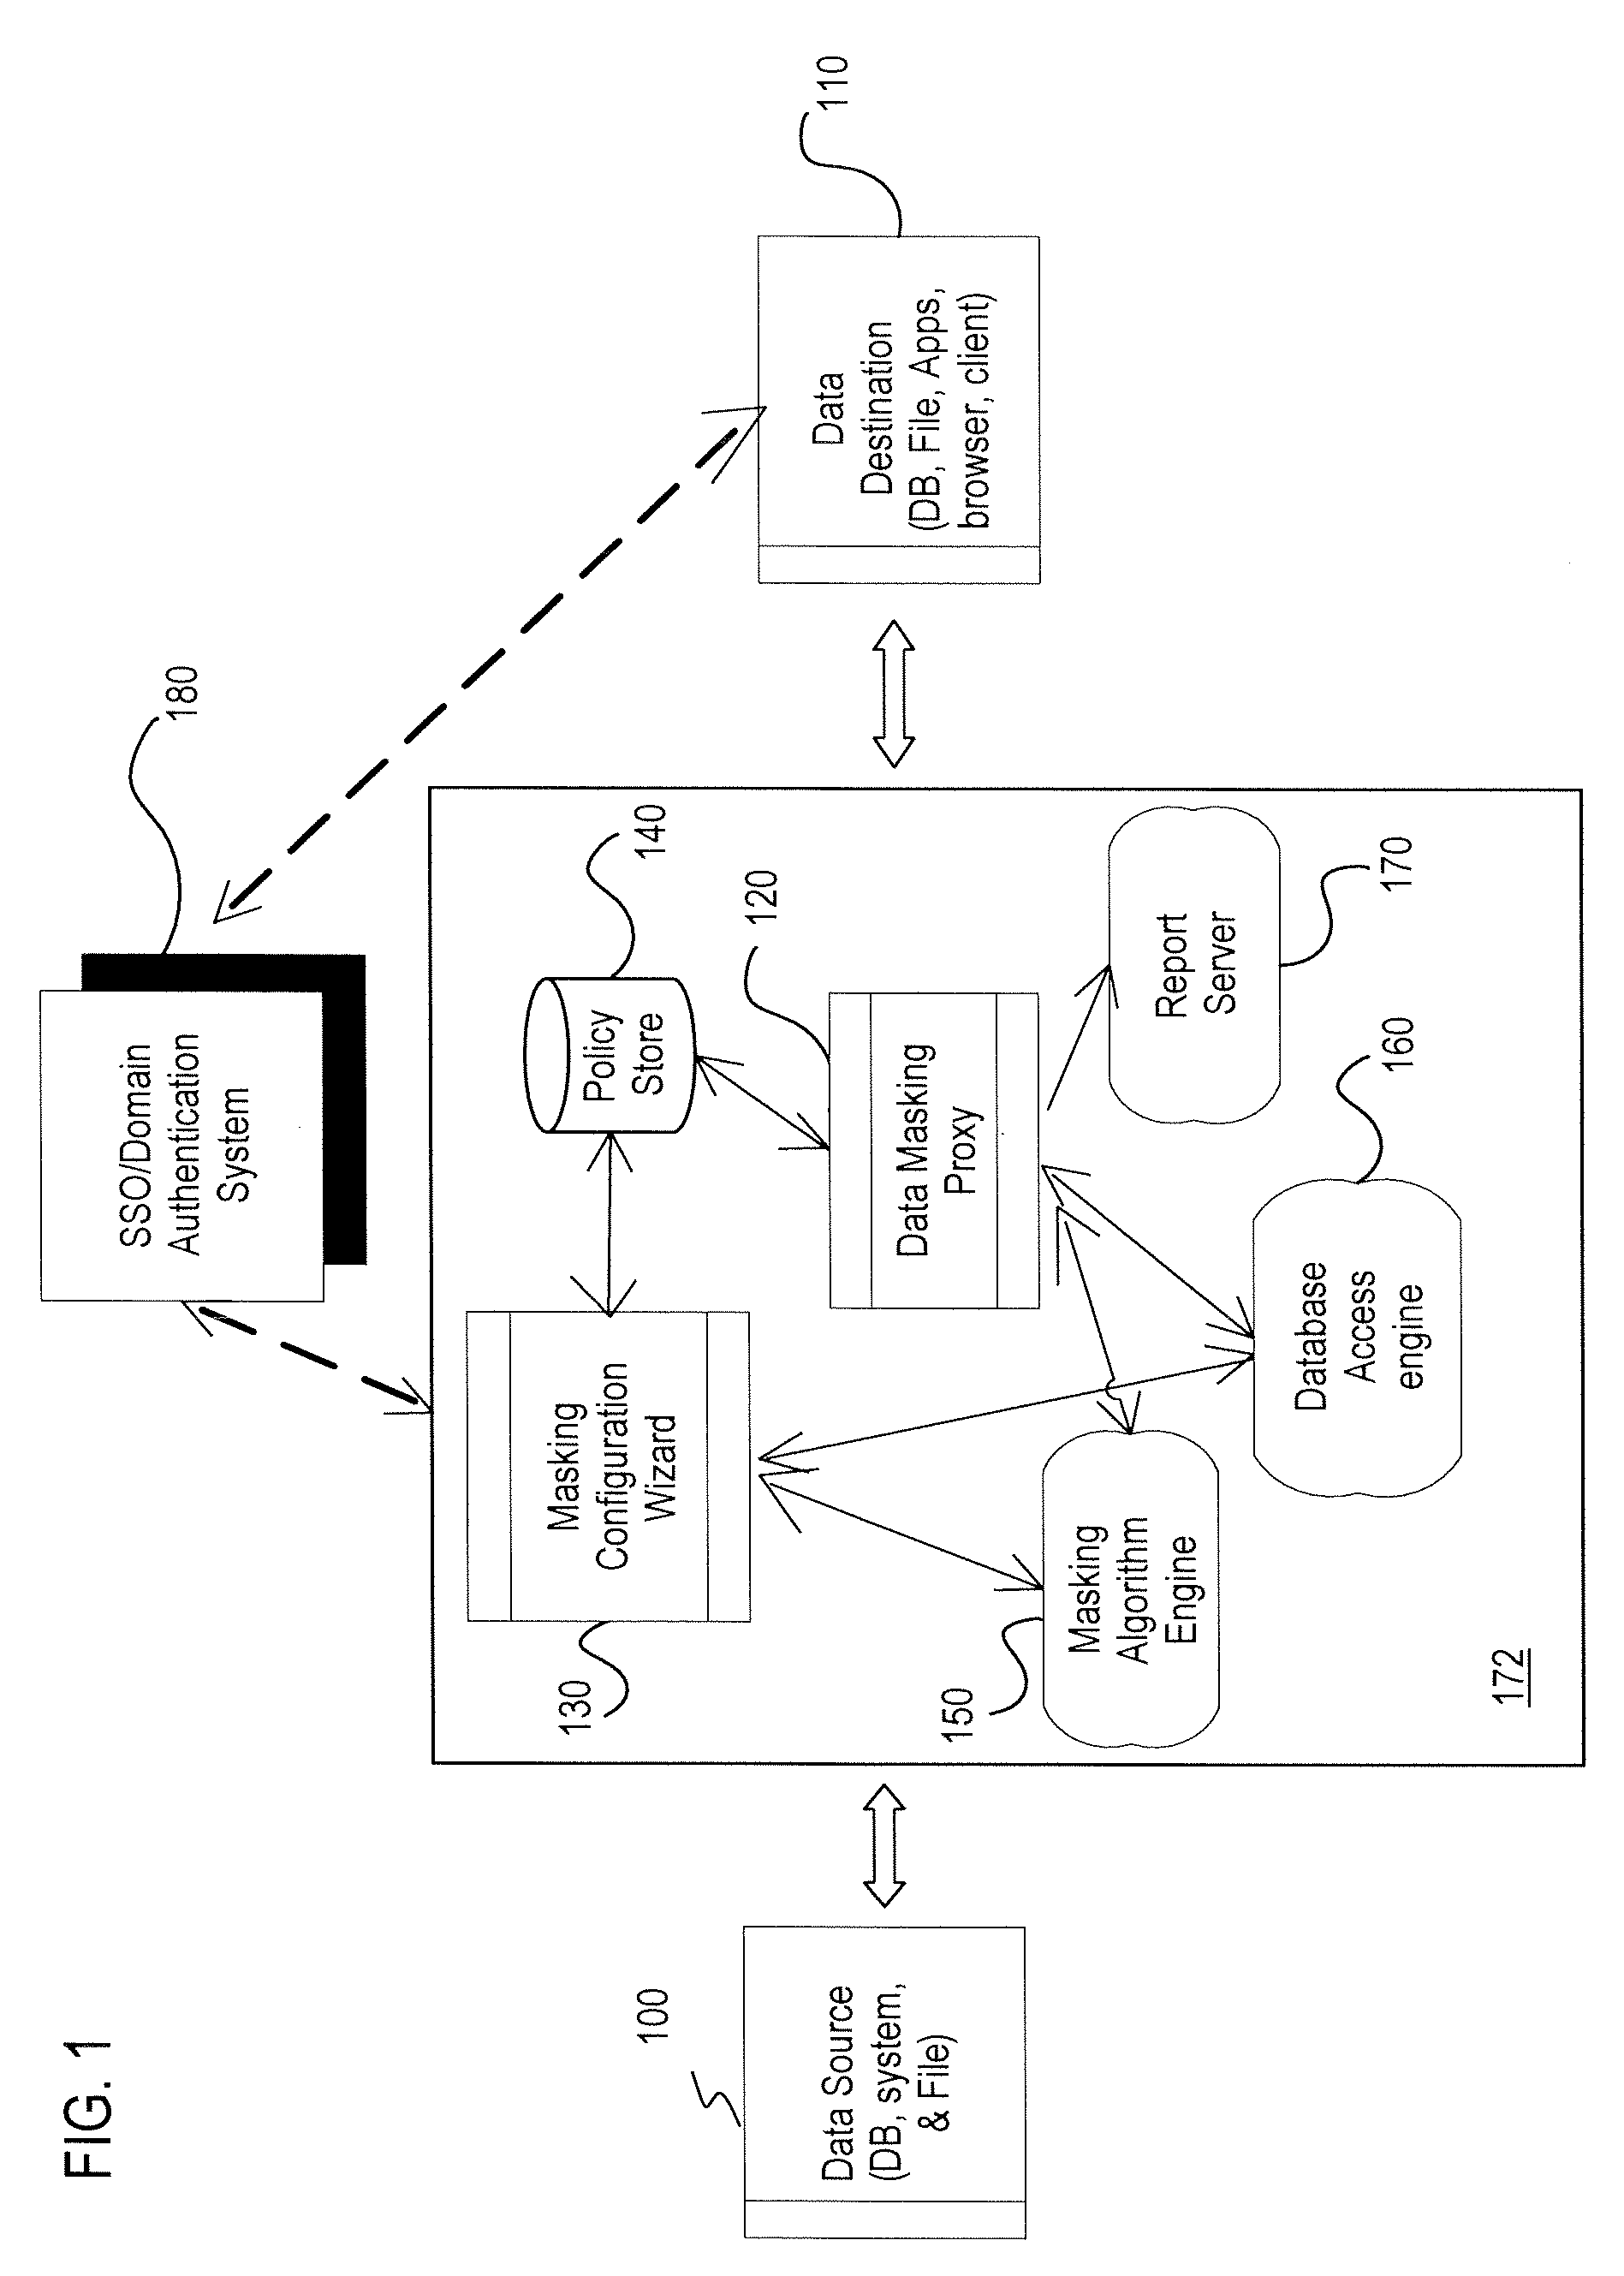 Method and apparatus for providing a data masking portal